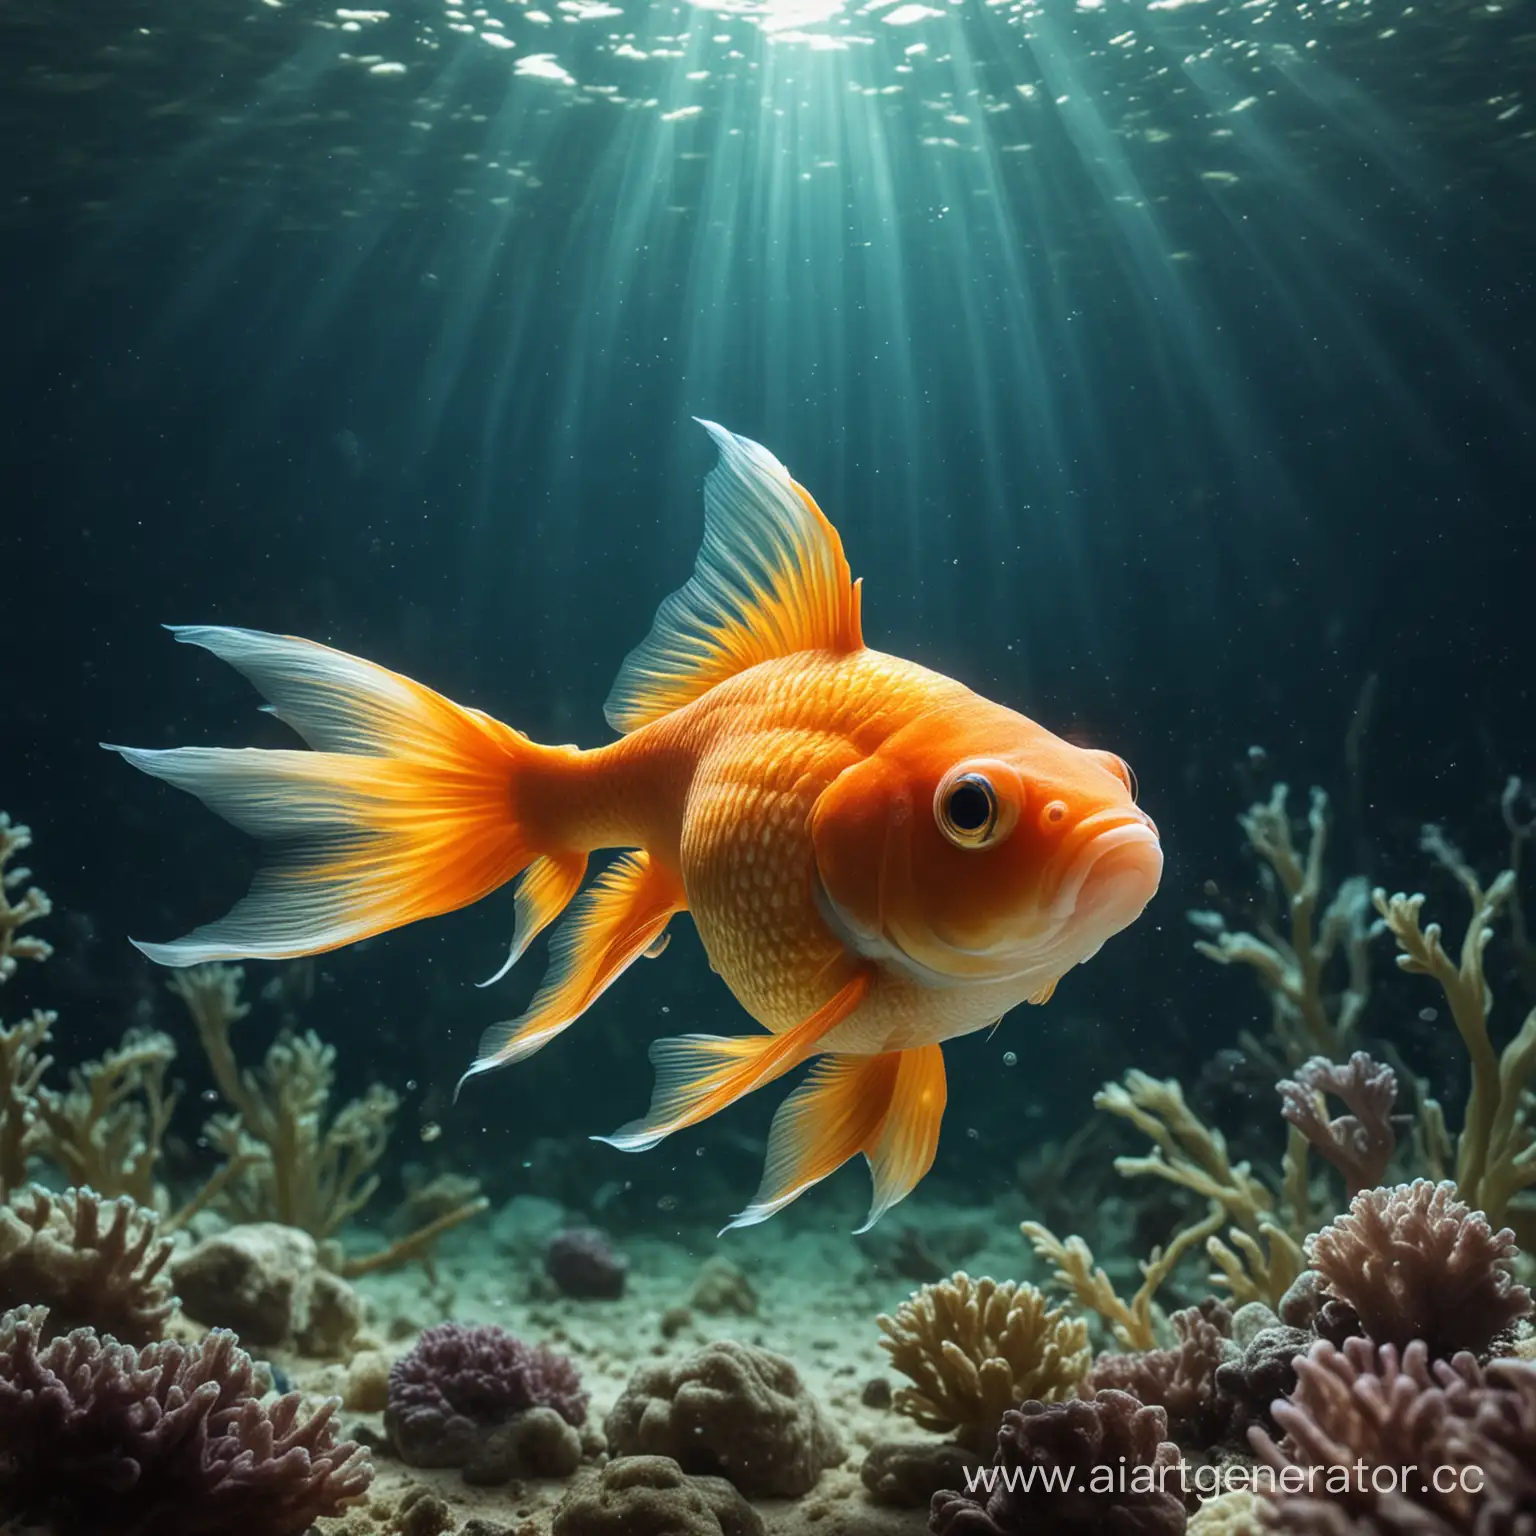 A goldfish.  Under the sea